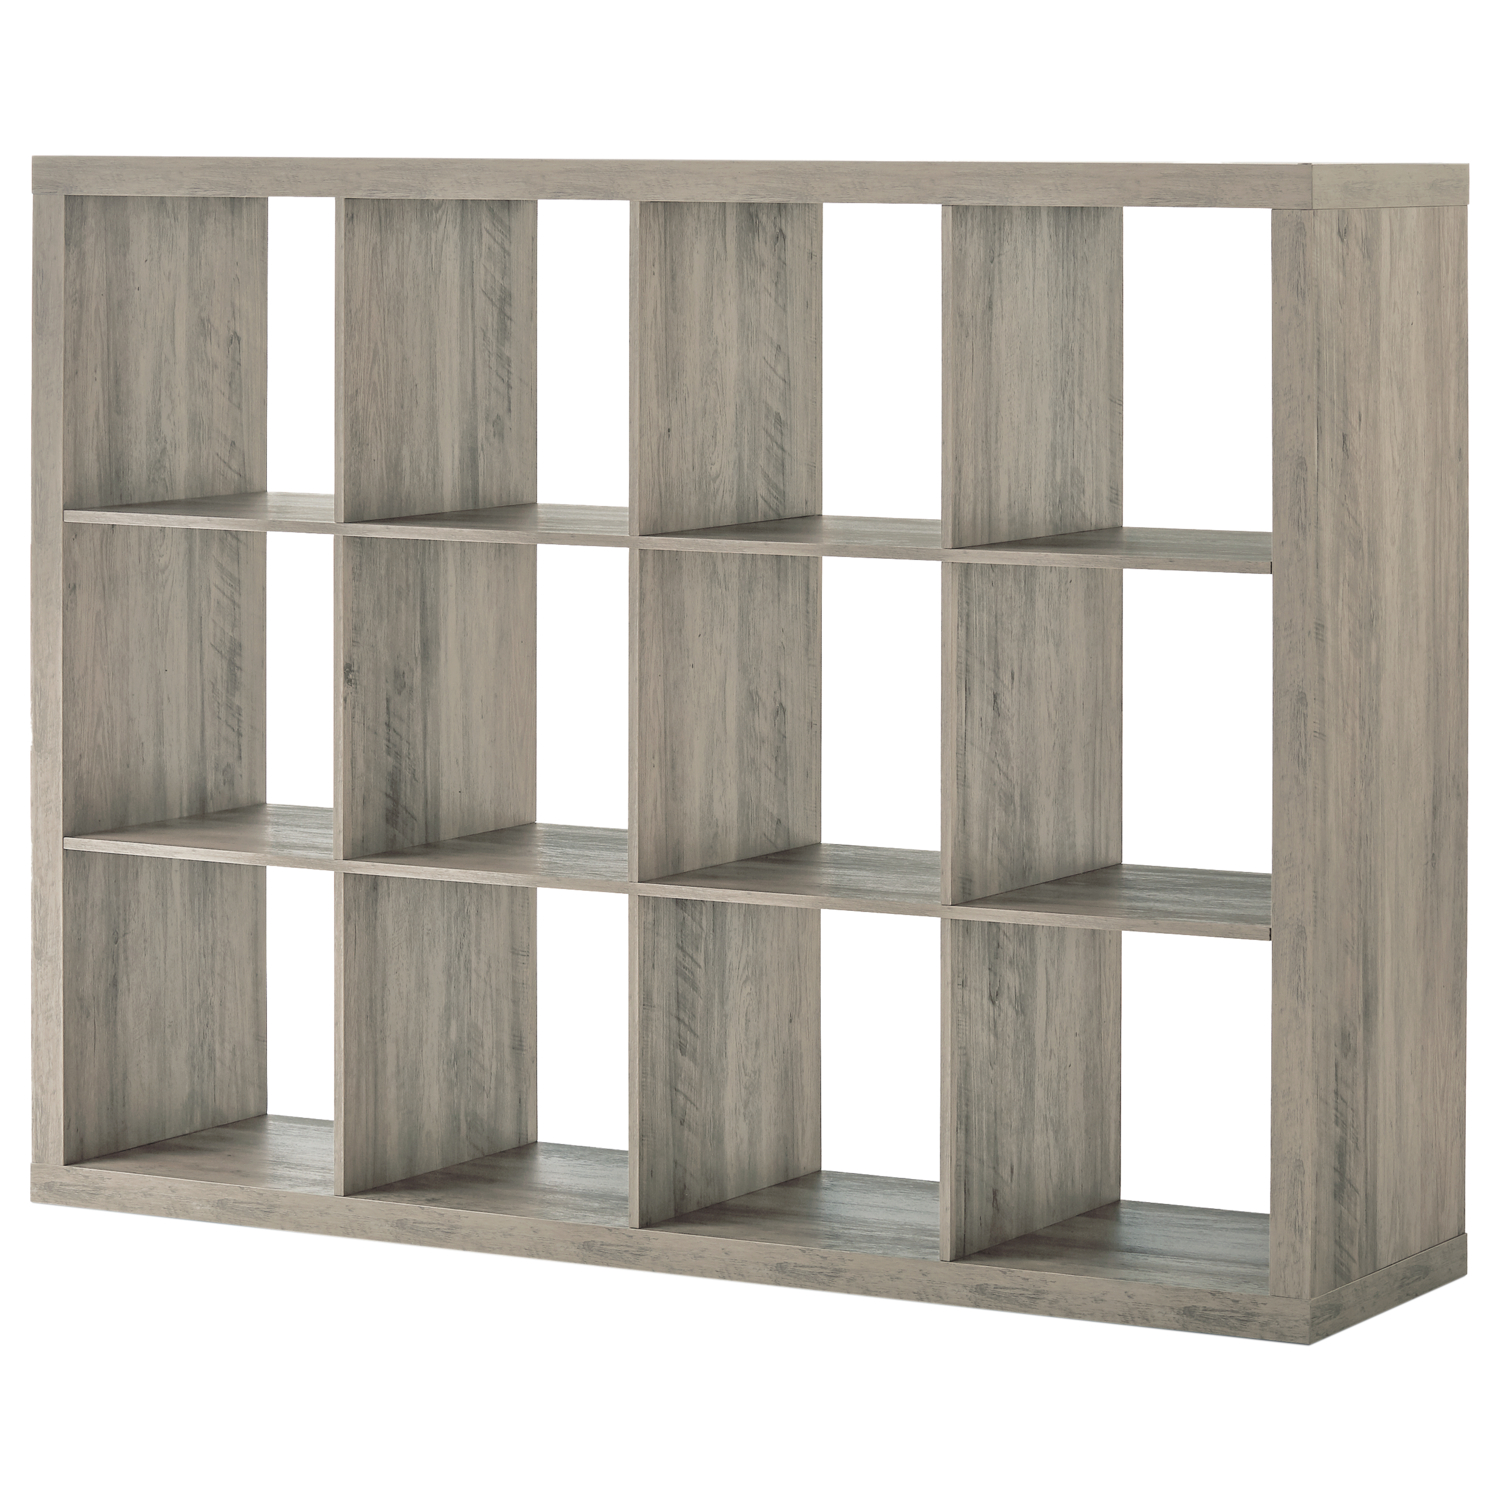 Better Homes & Gardens 12-Cube Storage Organizer, Rustic Gray - image 1 of 6